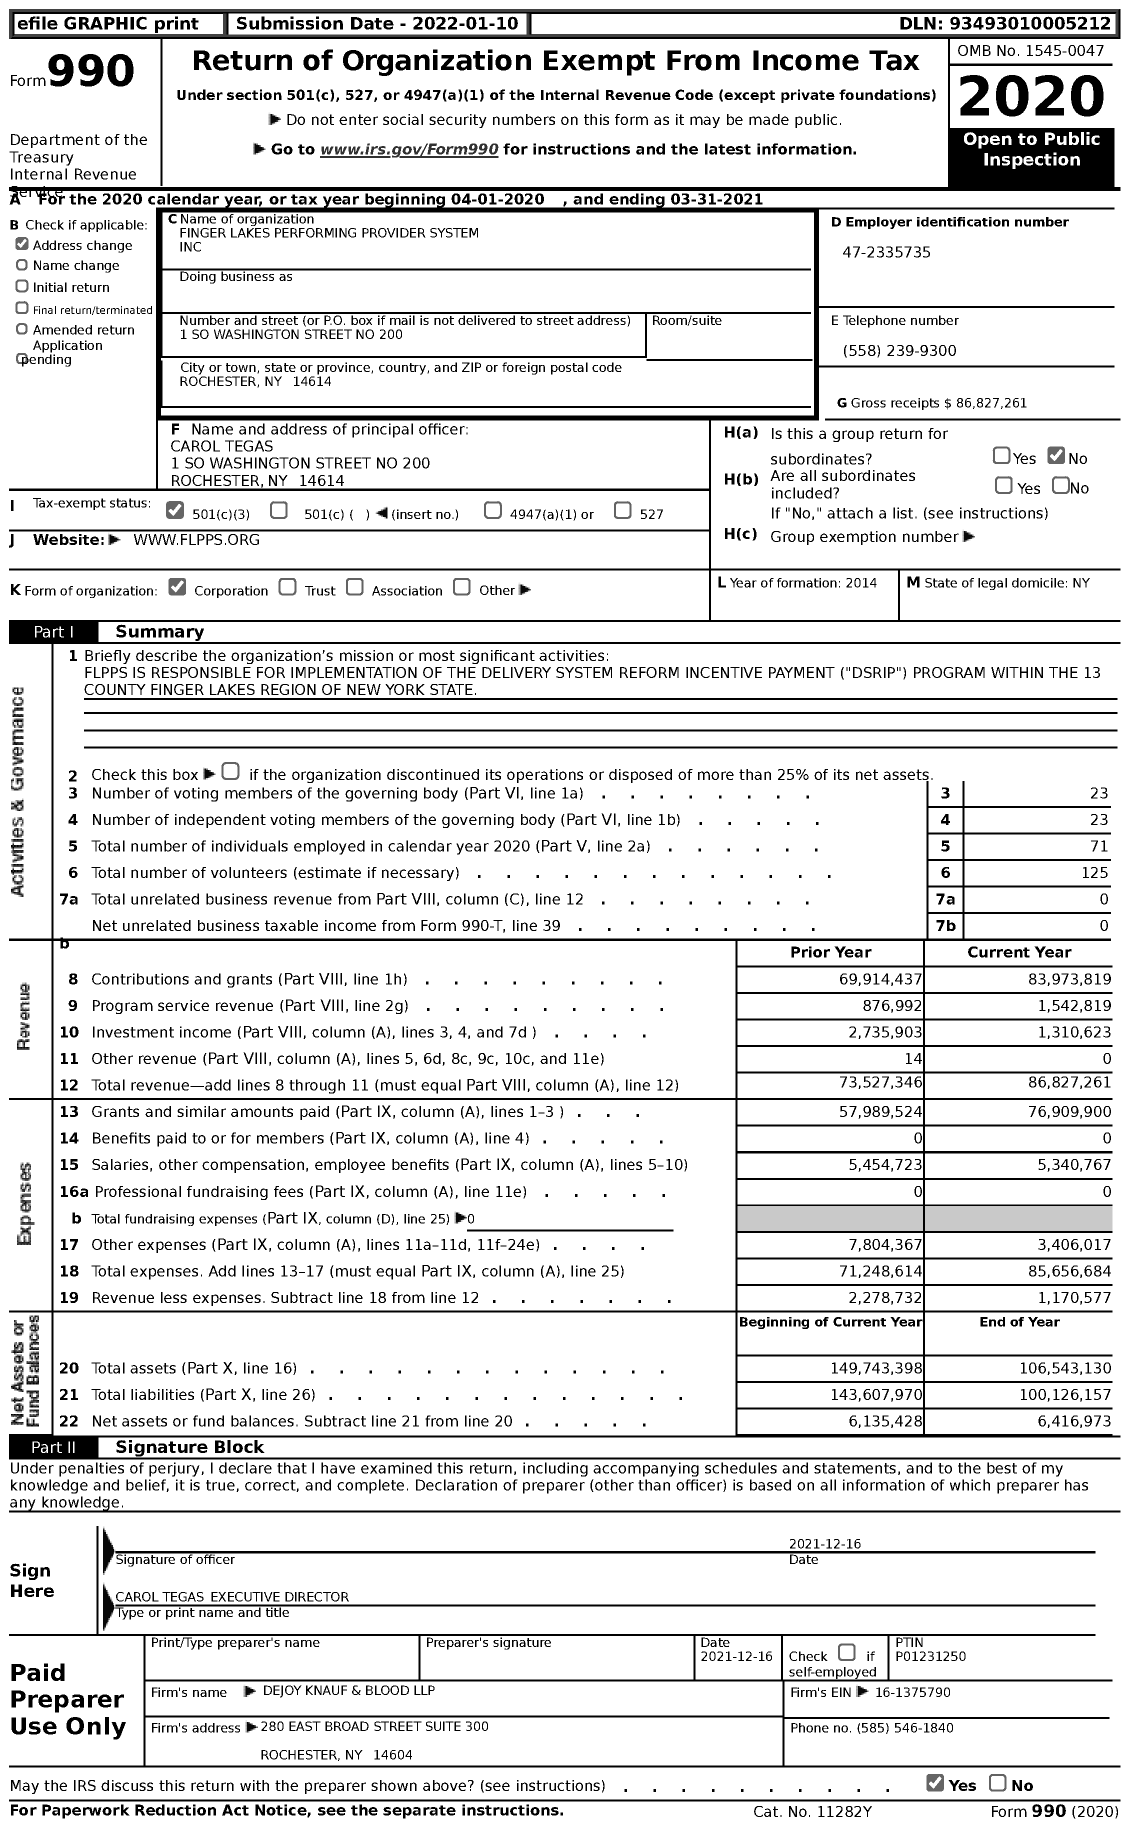 Image of first page of 2020 Form 990 for Finger Lakes Performing Provider System (FLPPS)